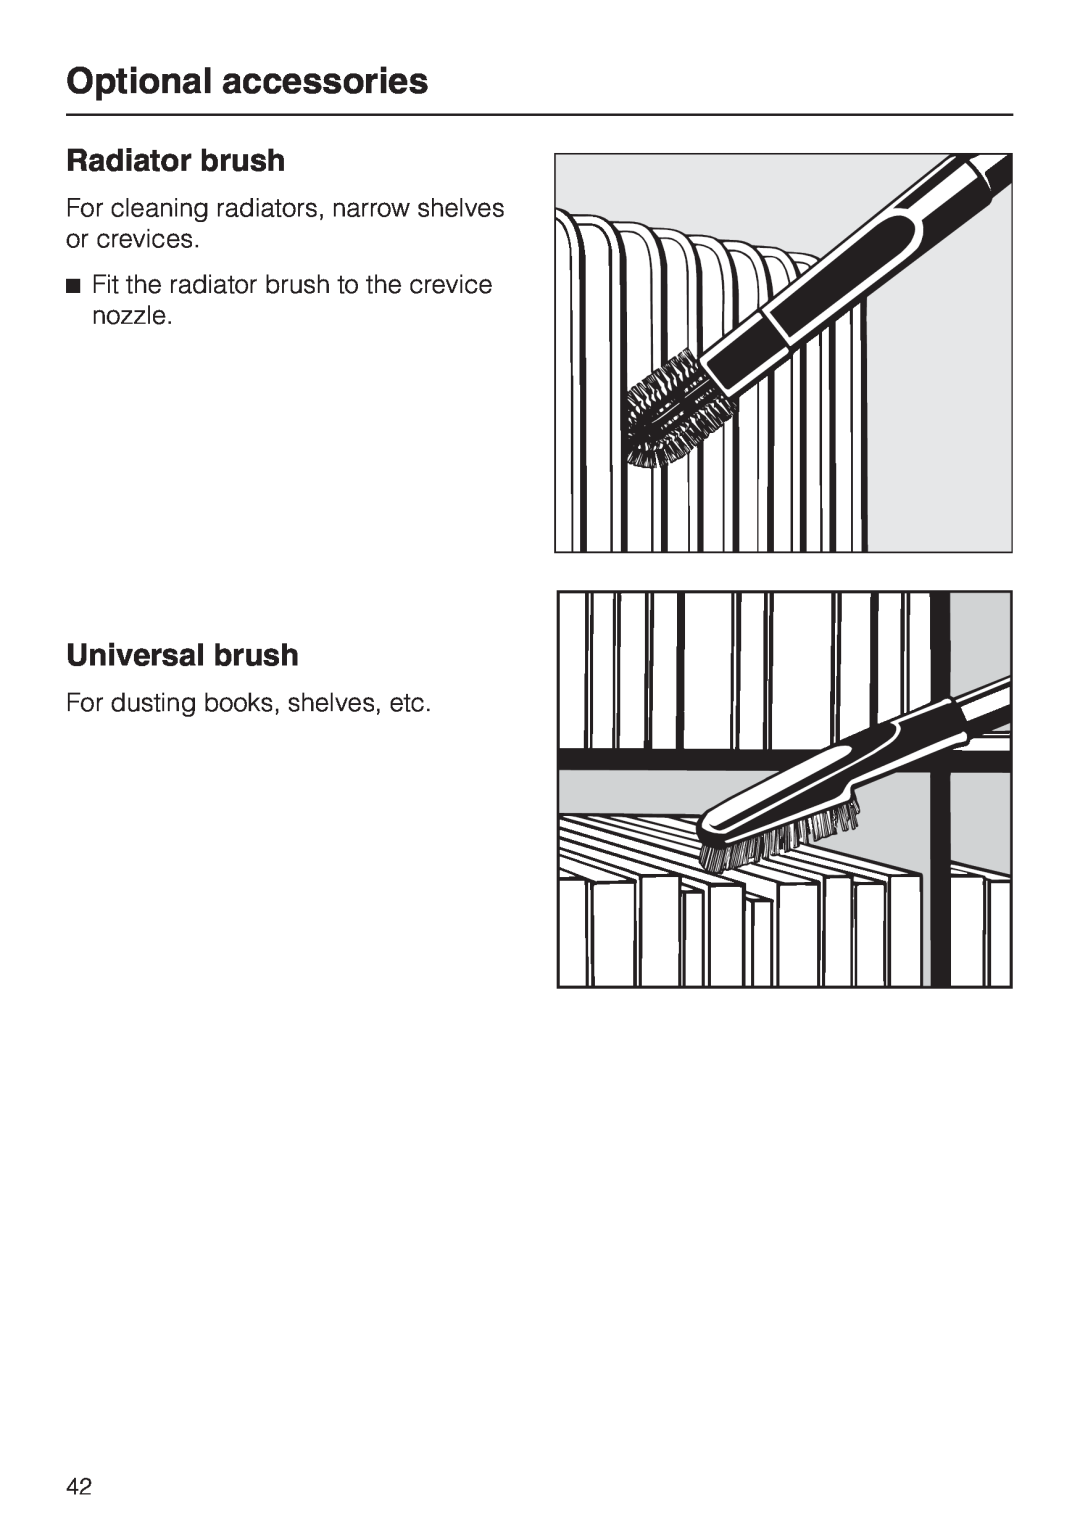 Miele S 558 manual Radiator brush, Universal brush, Optional accessories, Fit the radiator brush to the crevice nozzle 